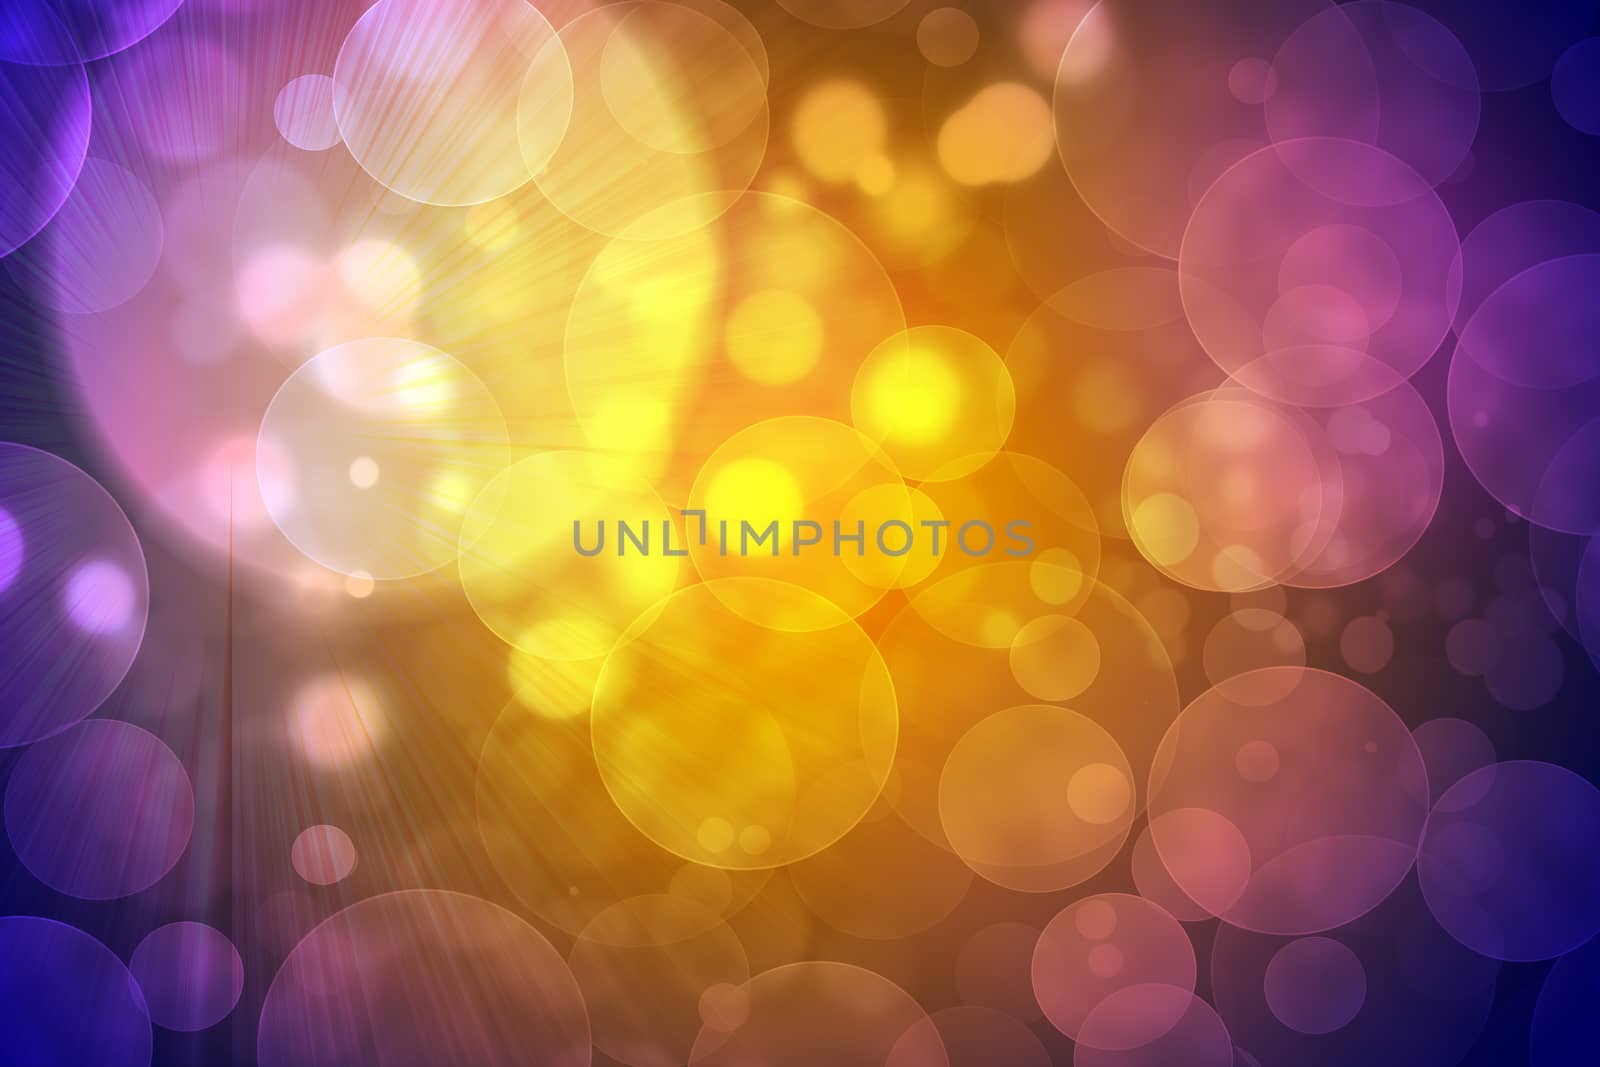 Abstract bright colorful background with light spots and rounds